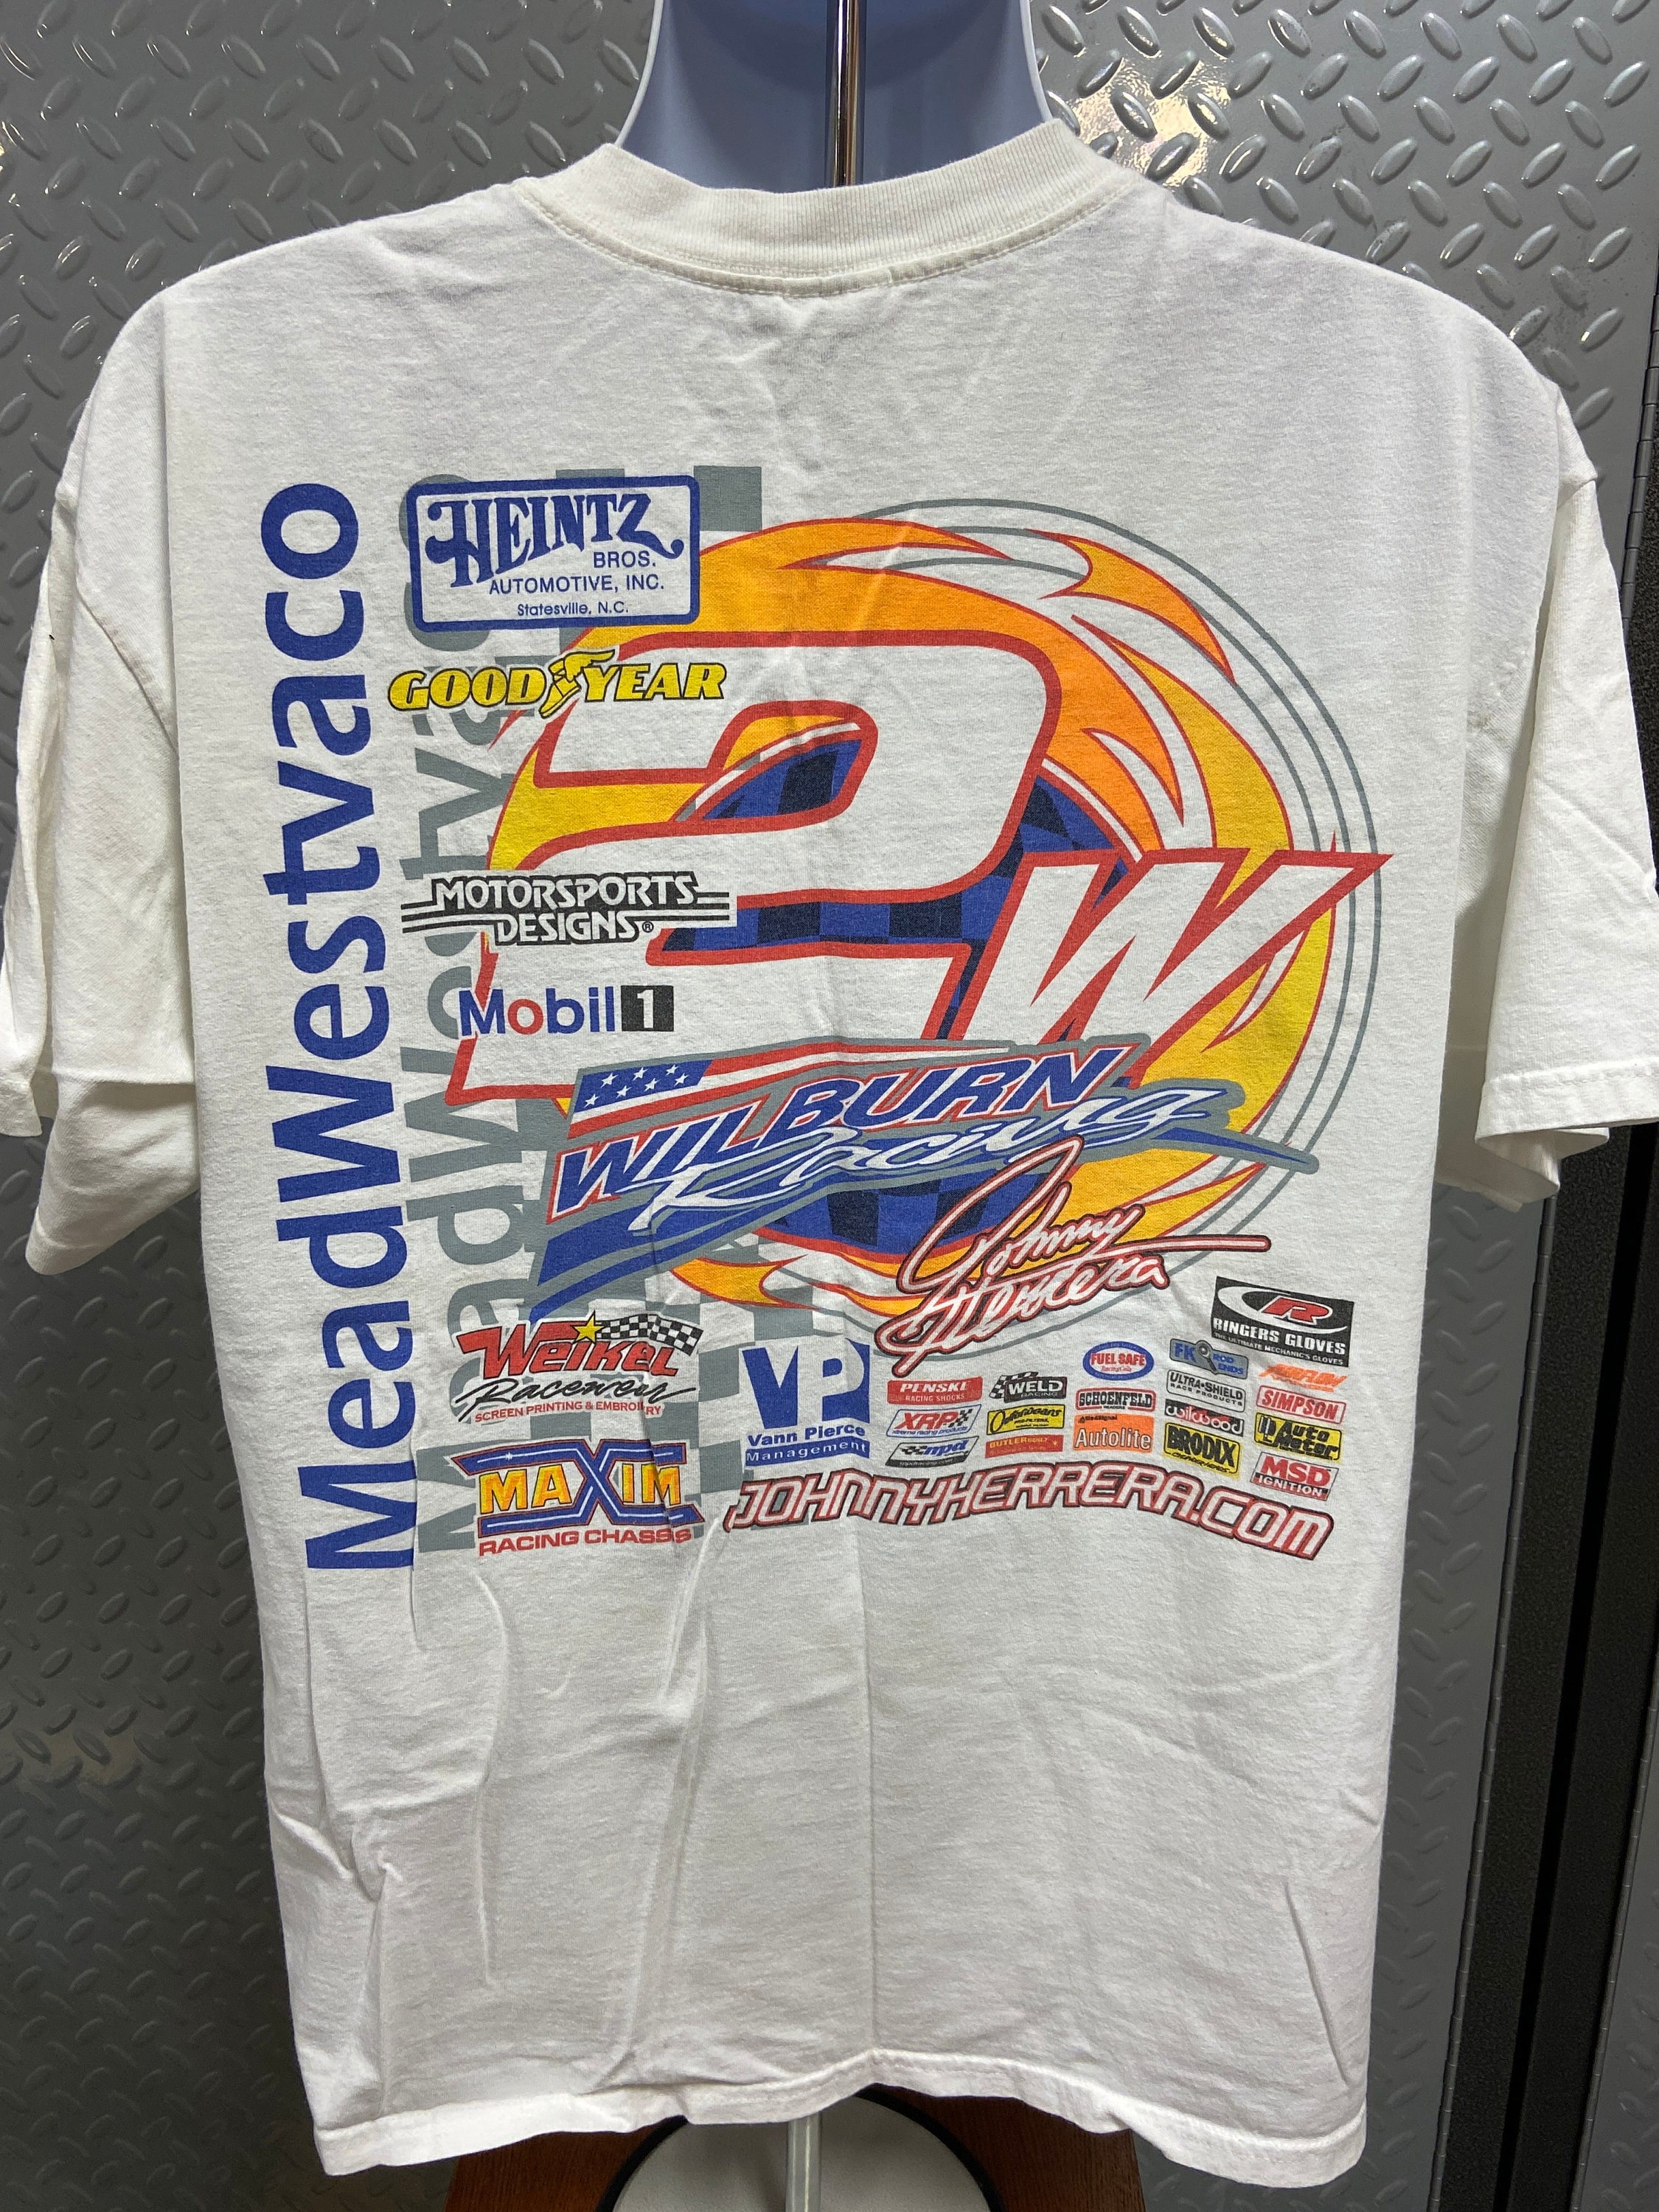 Pennzoil World of Outlaws 2000 Tシャツ XL